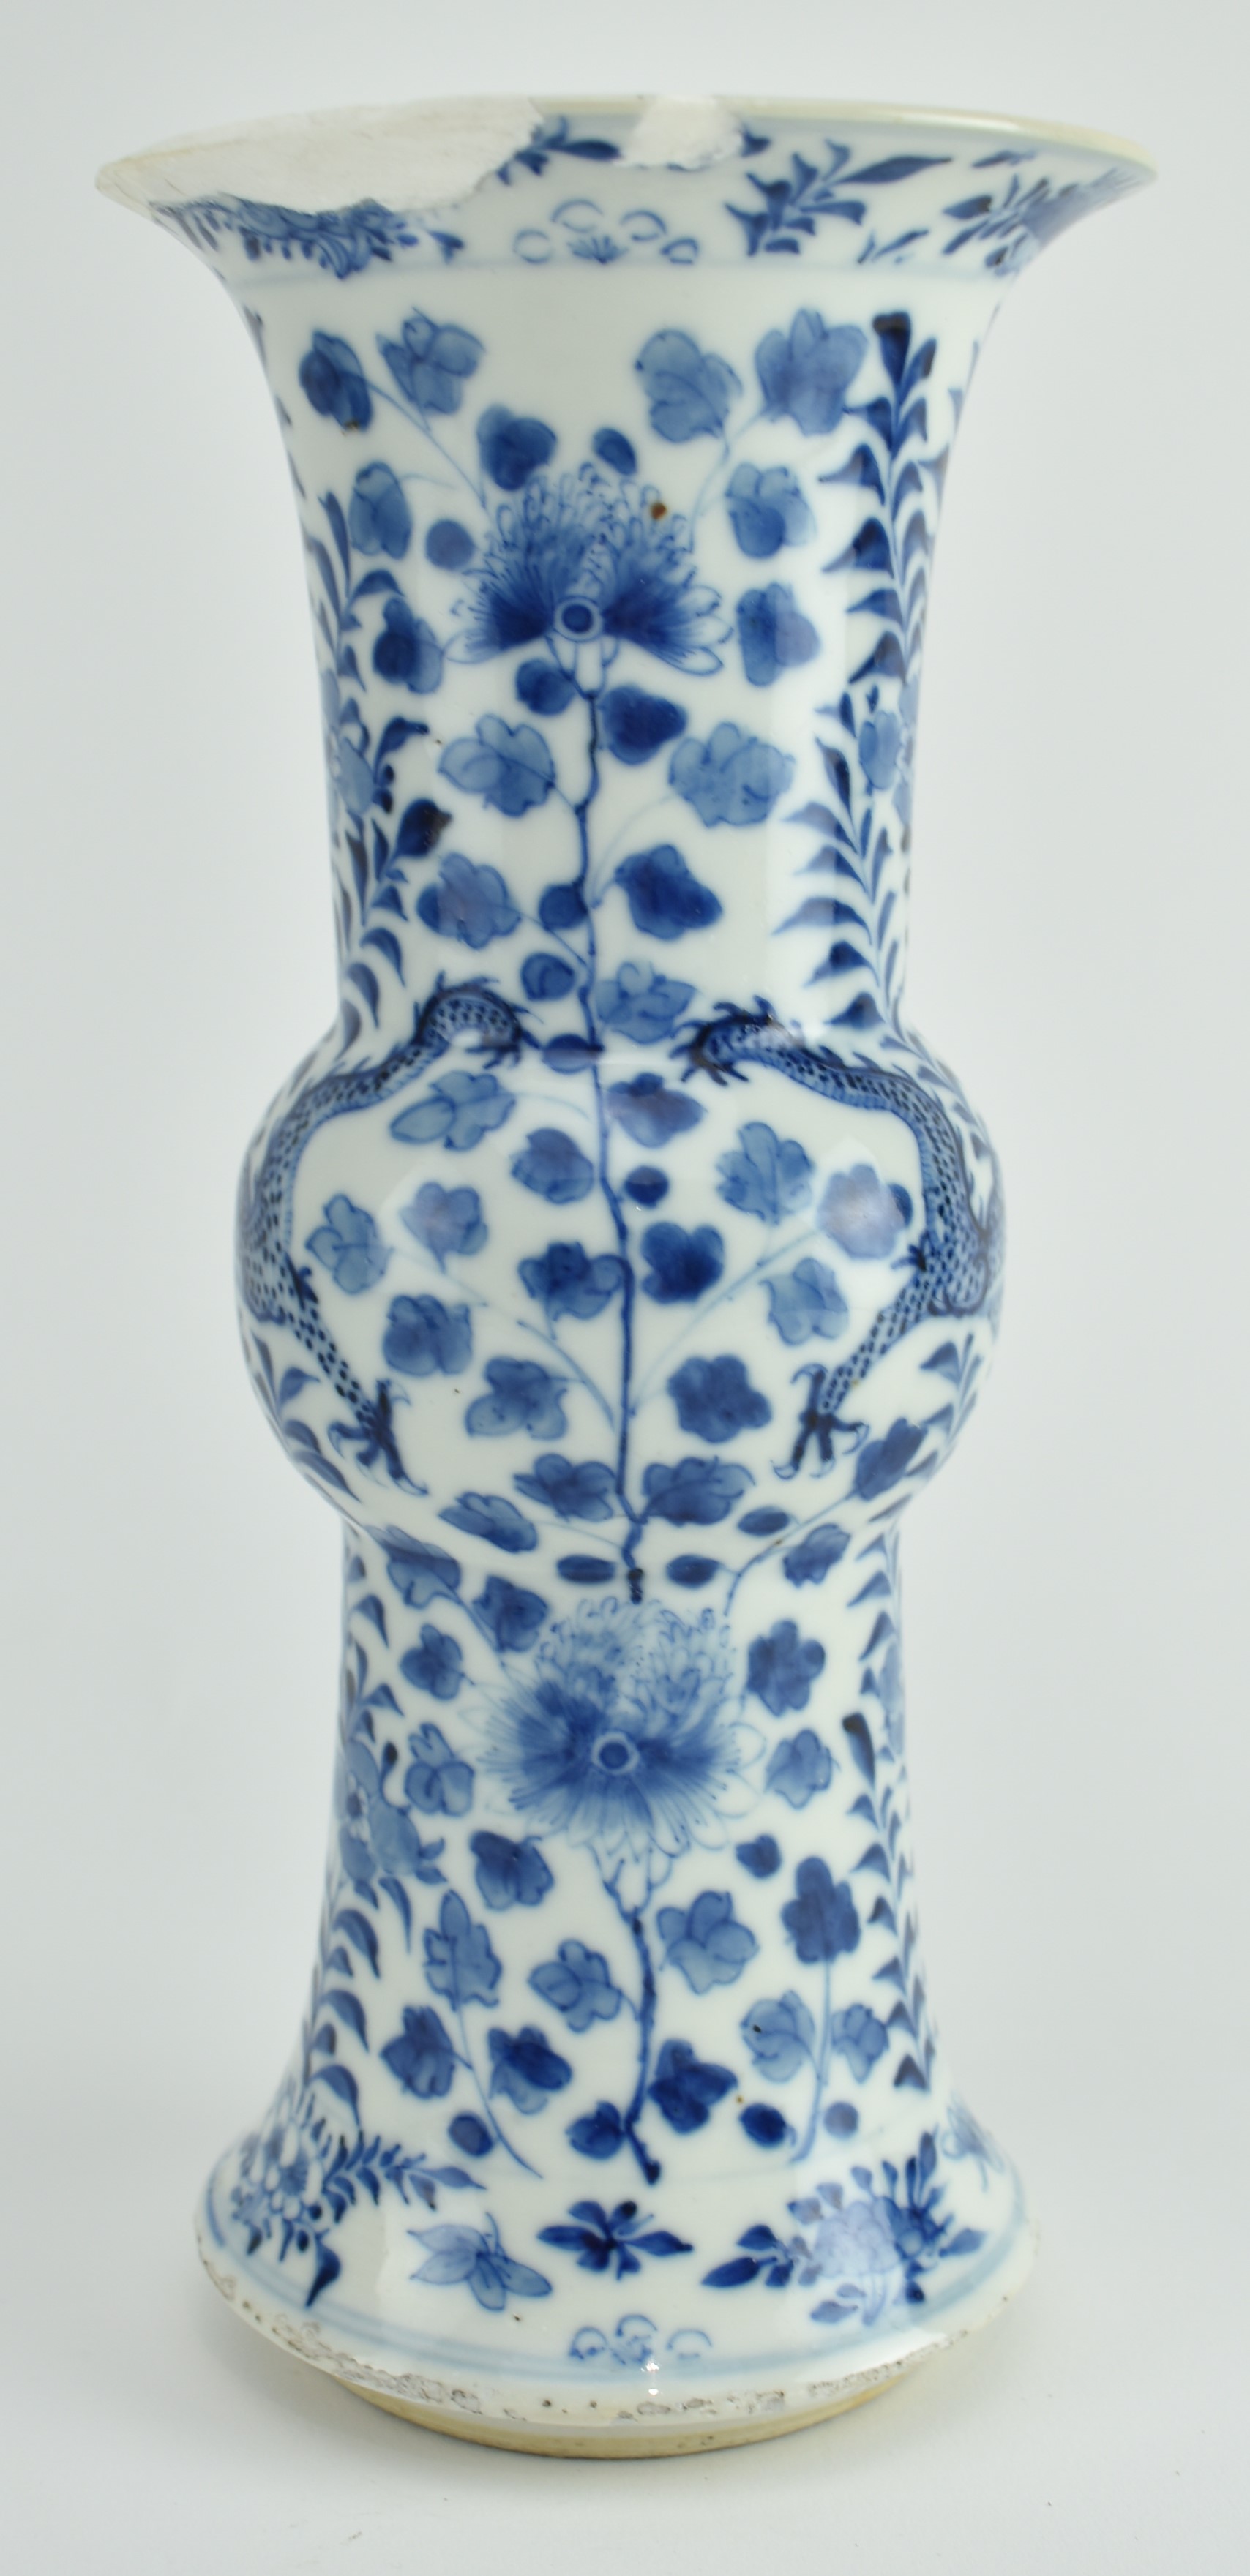 EARLY 20TH CENTURY BLUE AND WHITE DOUBLE DRAGONS GU VASE - Image 3 of 7